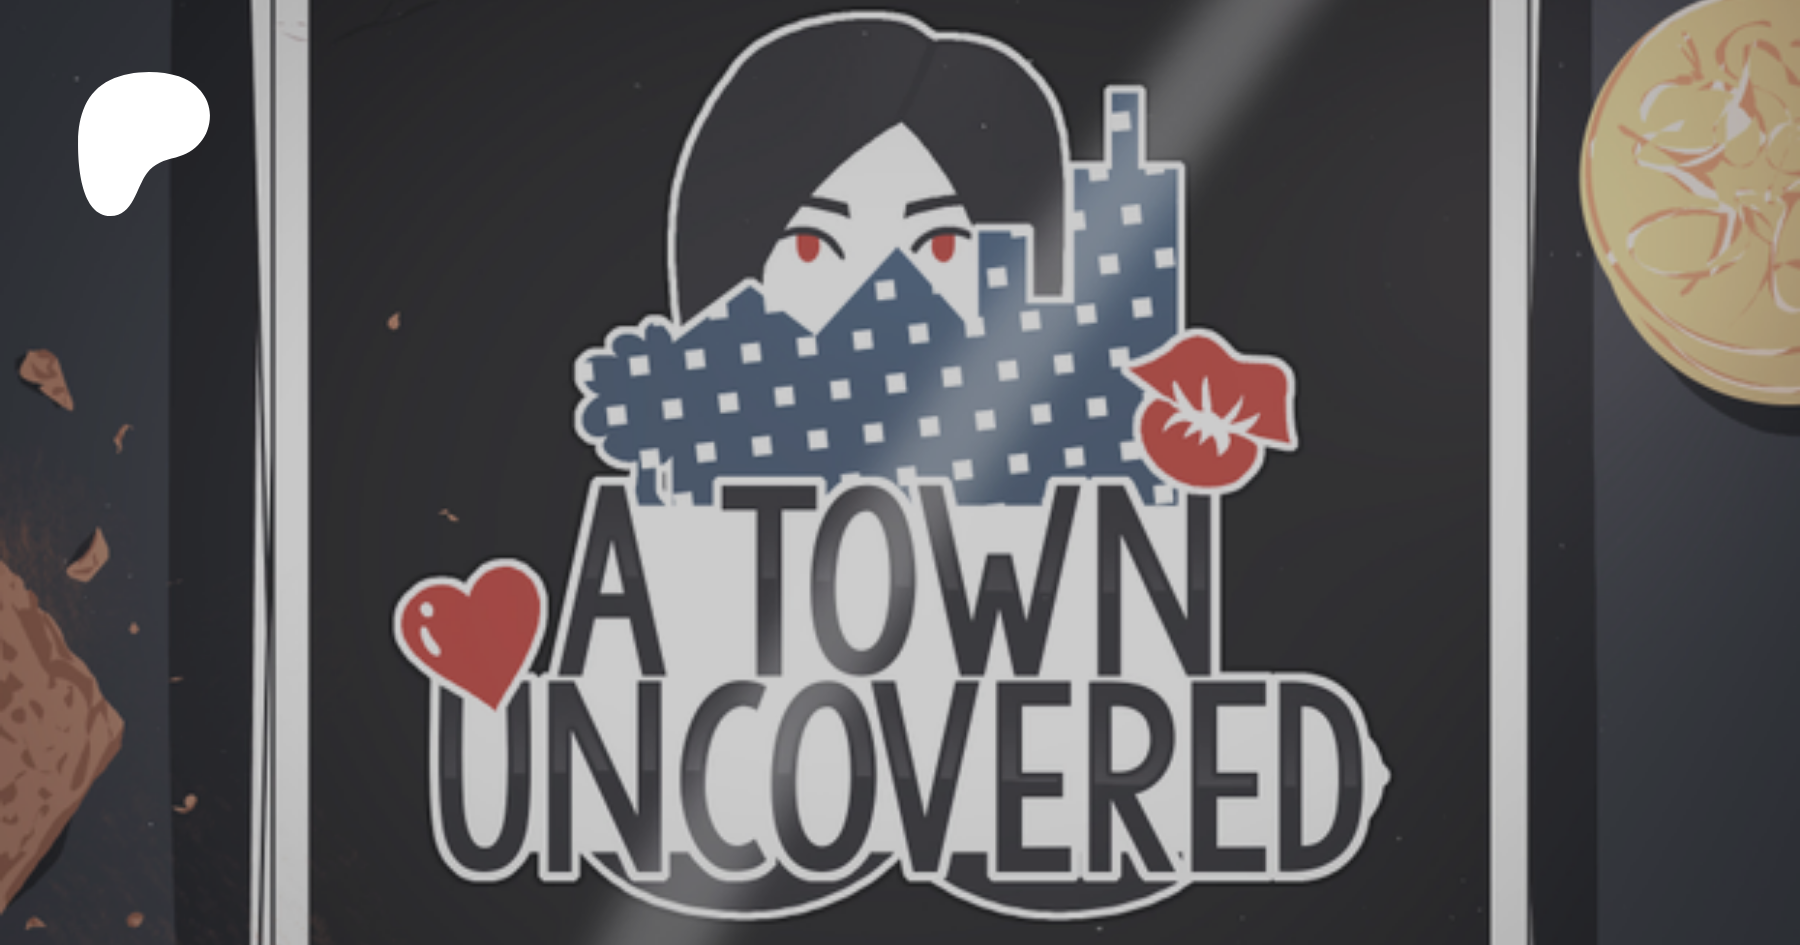 A town uncovered patreon